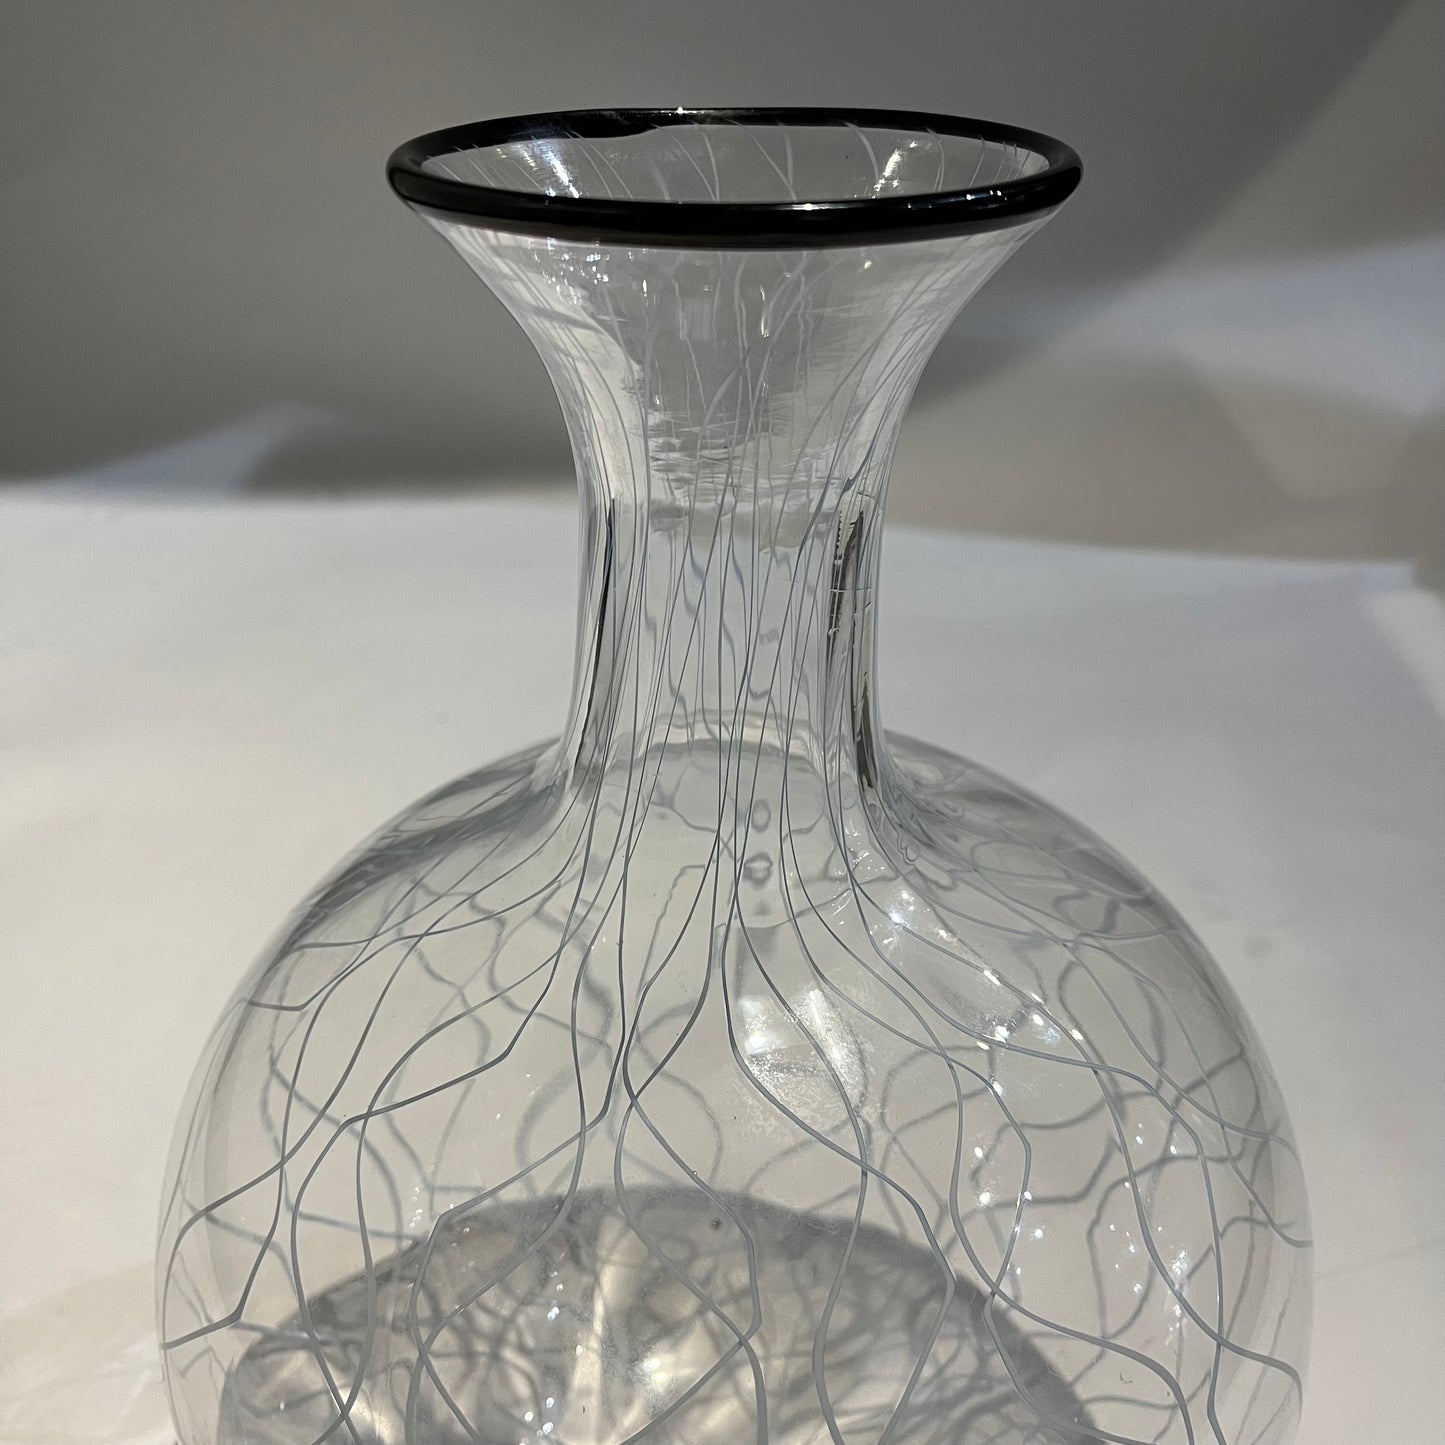 Glass Vase with Abstract Motif 12" x 8.5"